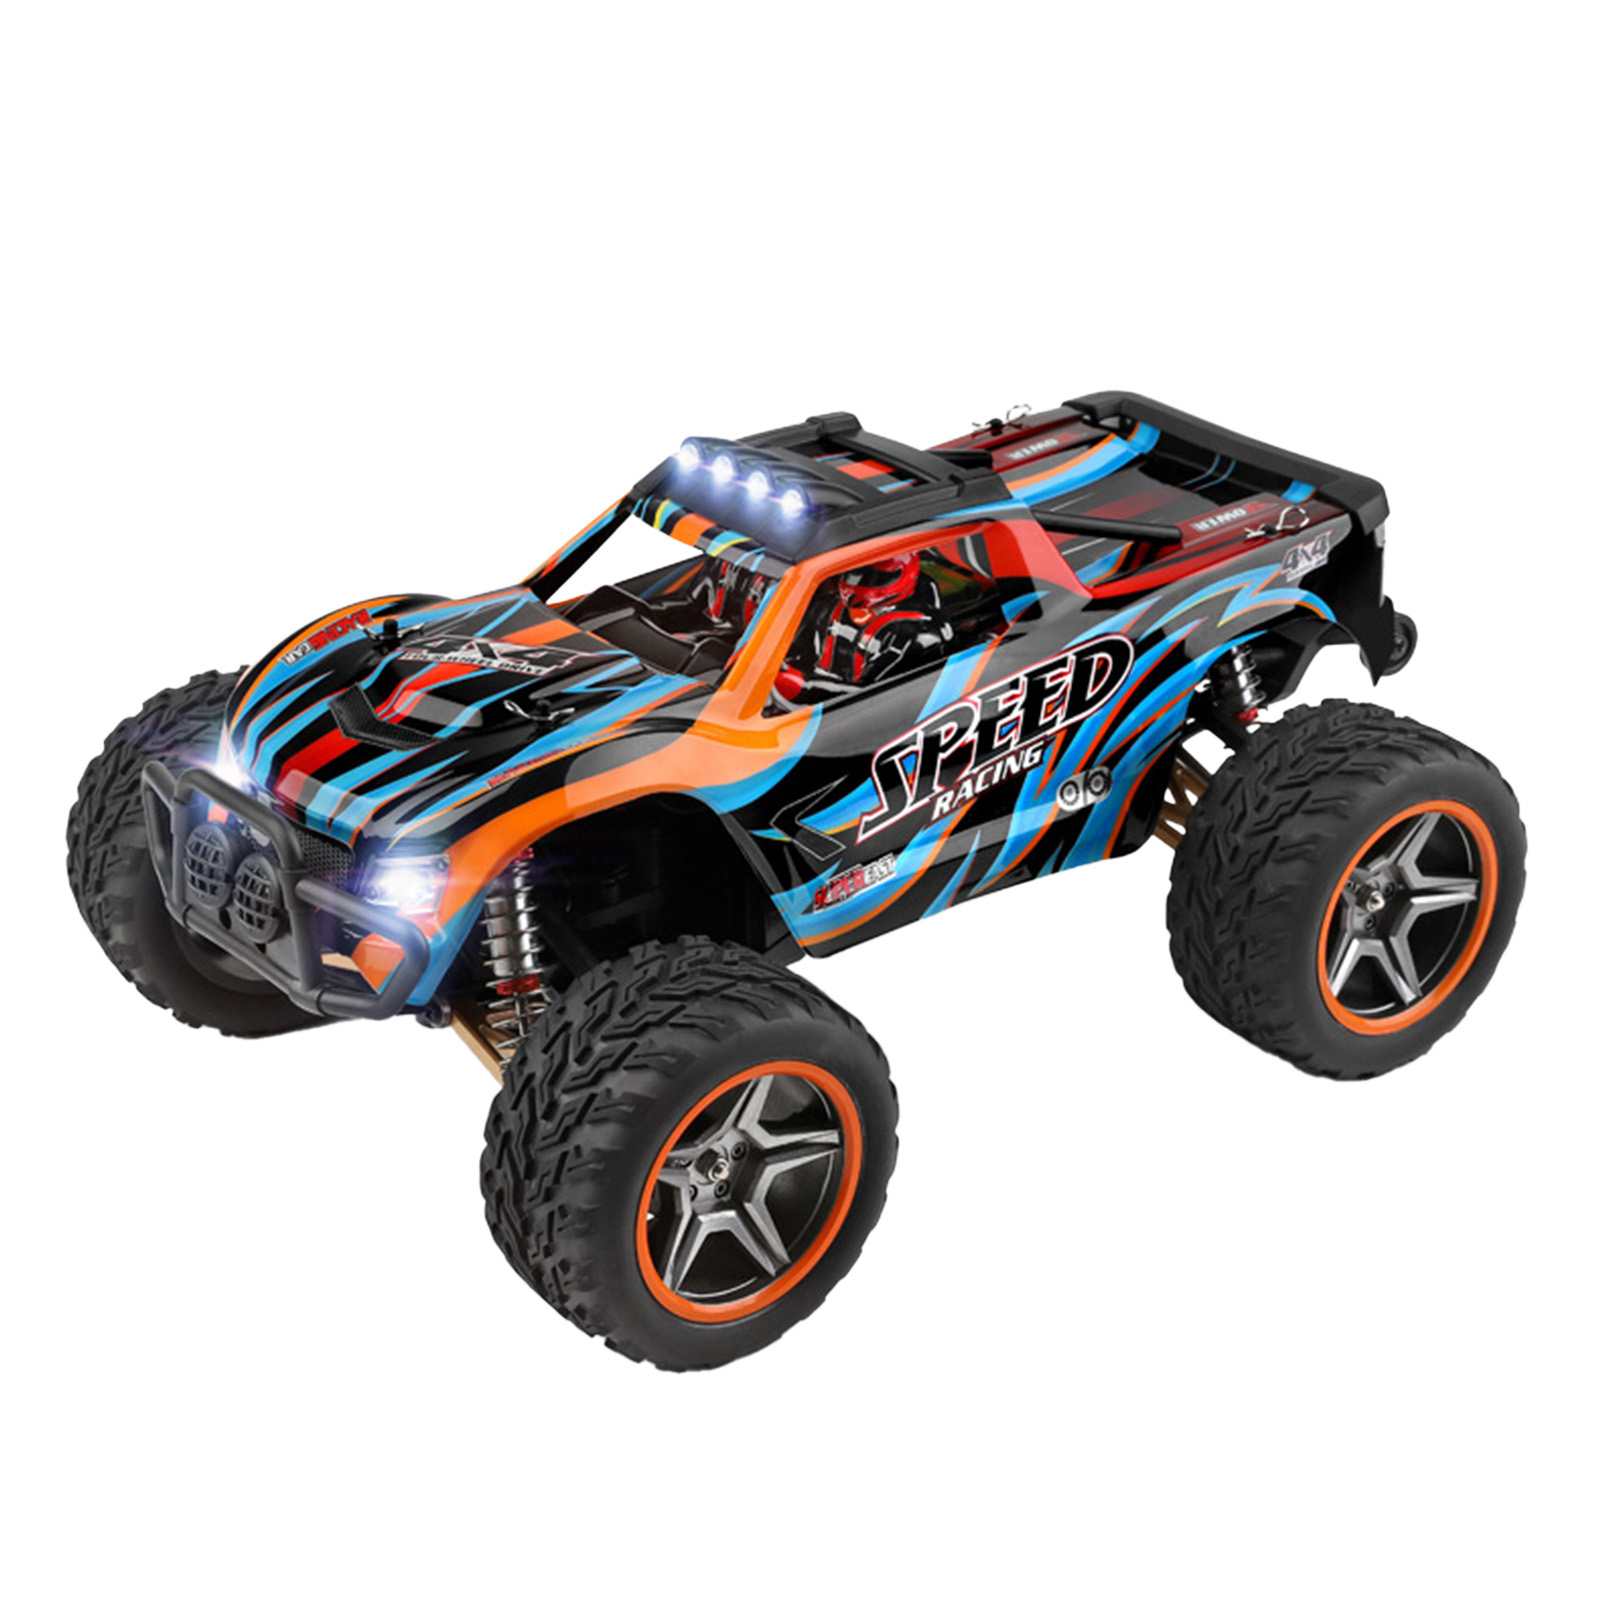 WLtoys 1:10 RC Car 4wd 45km/H High Speed Off-Road Vehicle Electric RC Drift Climbing Car Orange Red